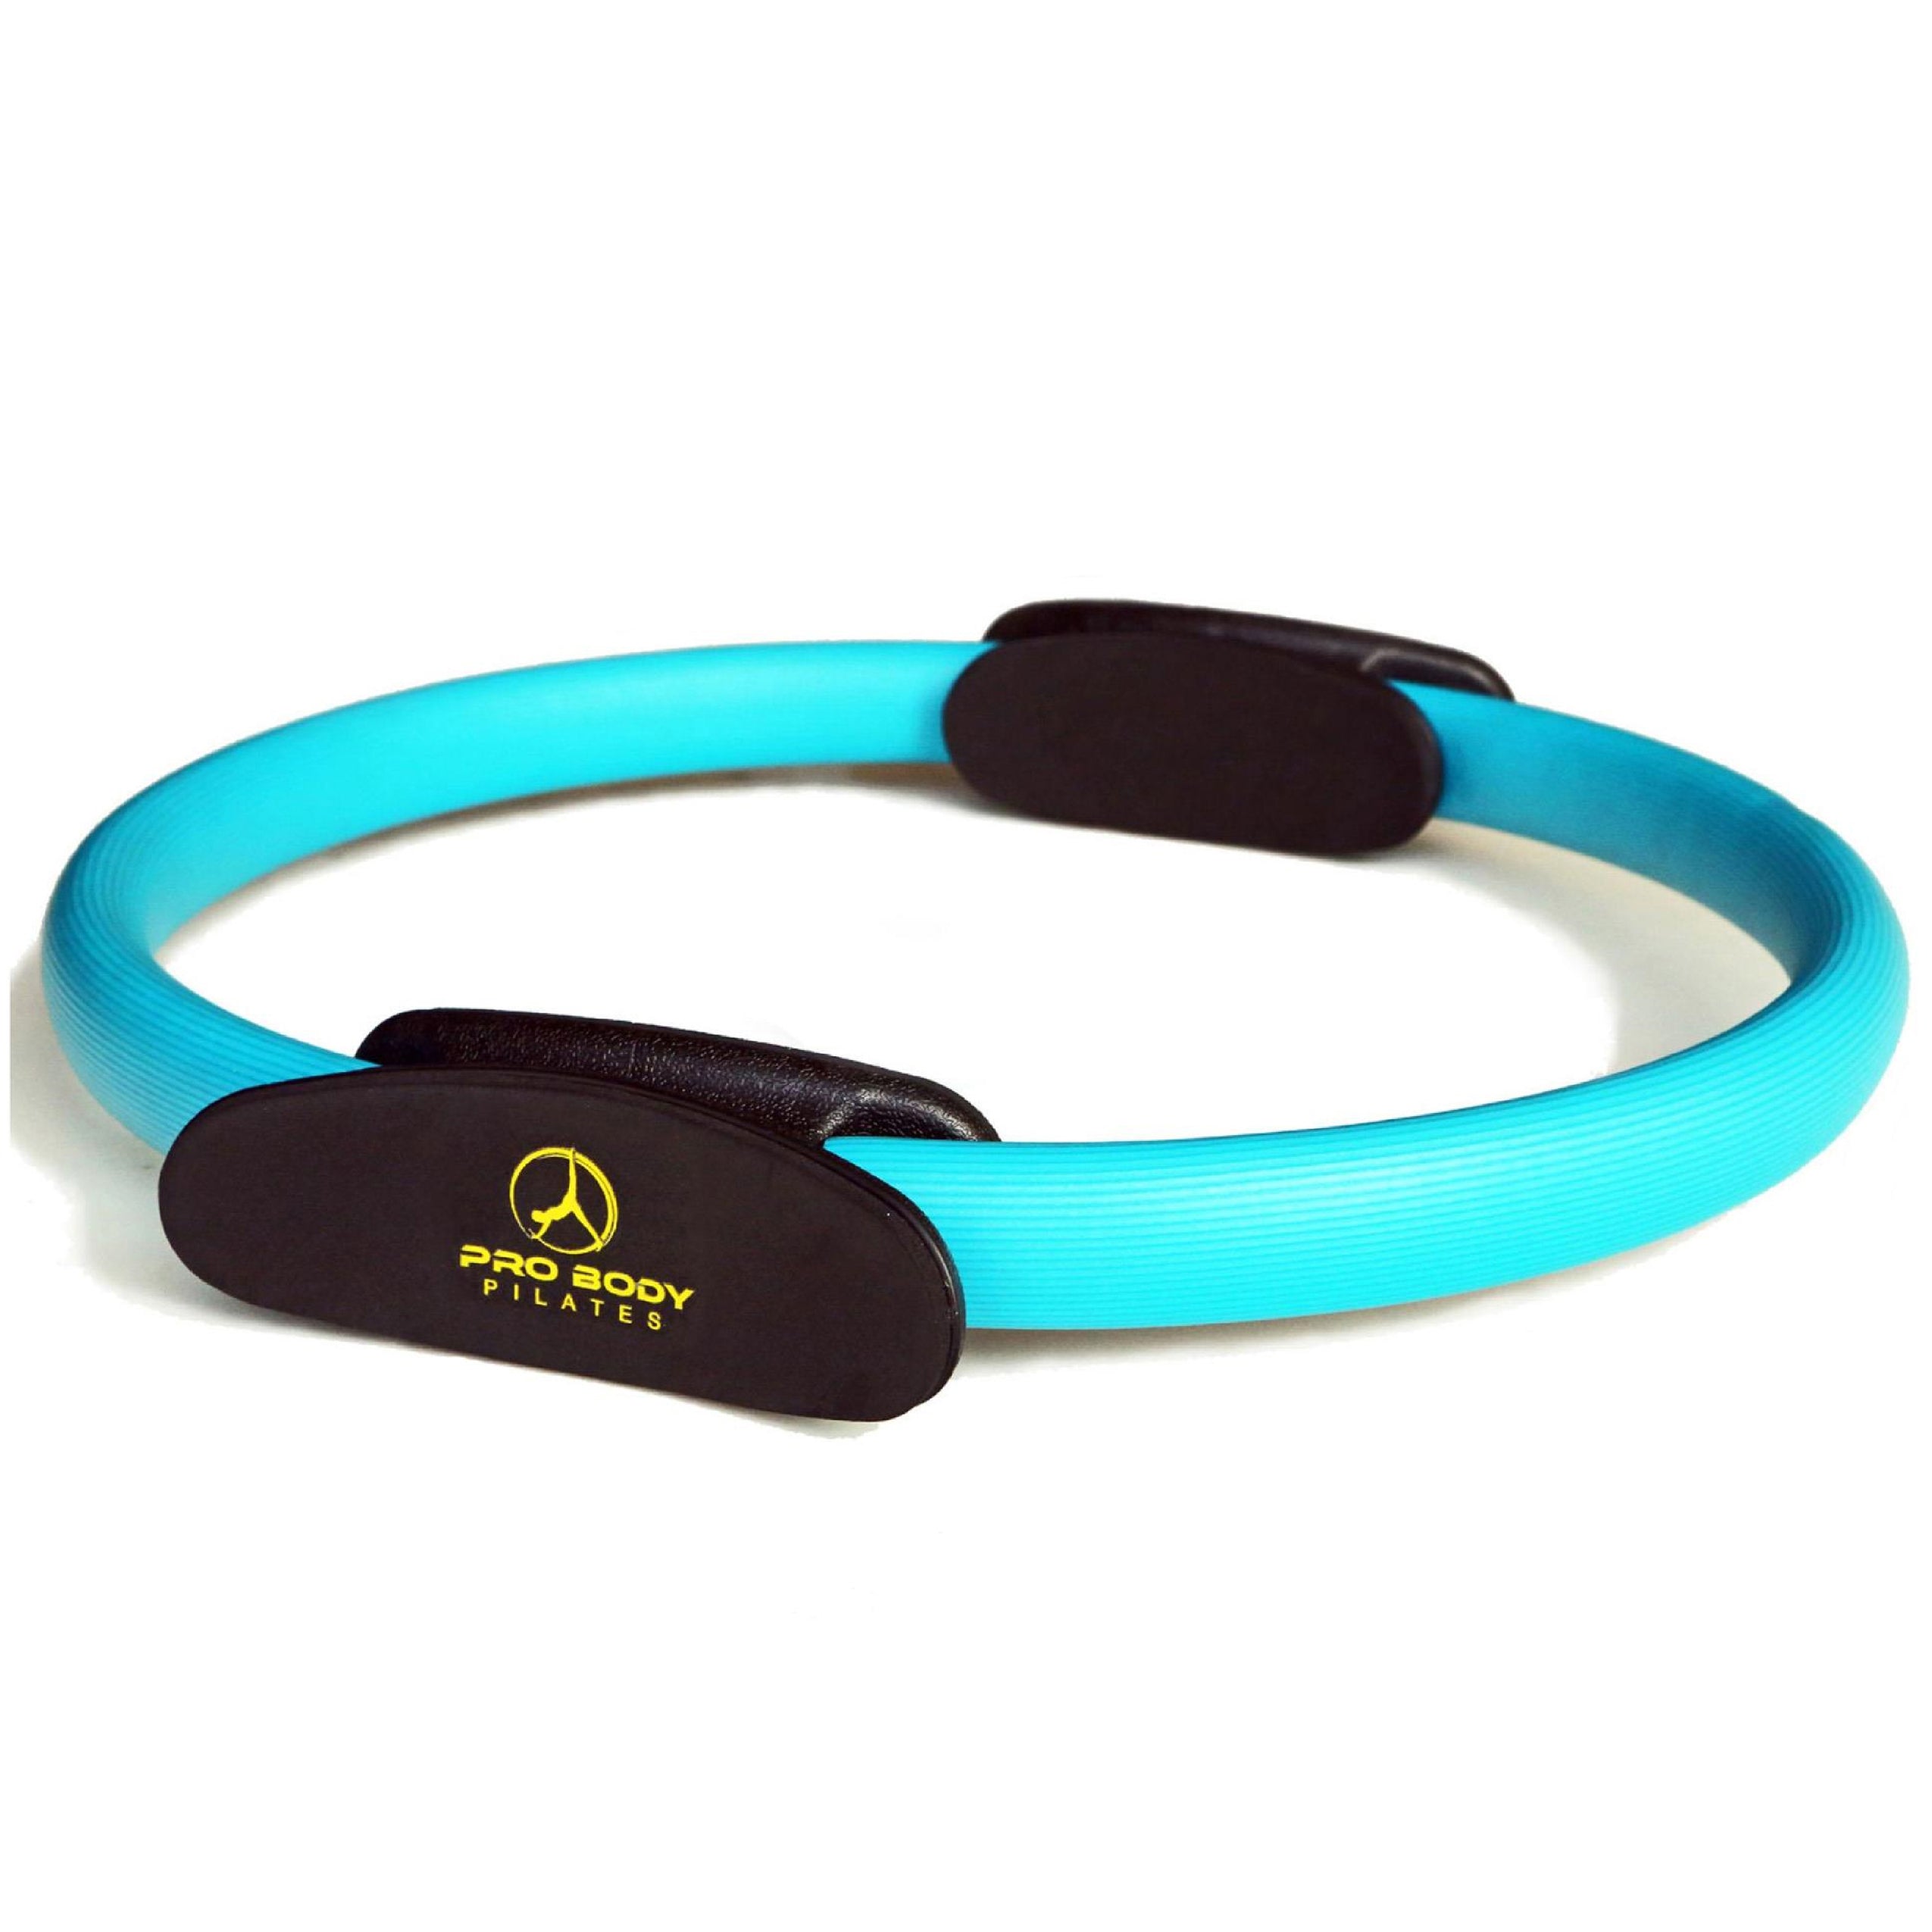 Premium Set of 5 Exercise Bands to Complement Pilates, Yoga, Physical –  ProBody Pilates